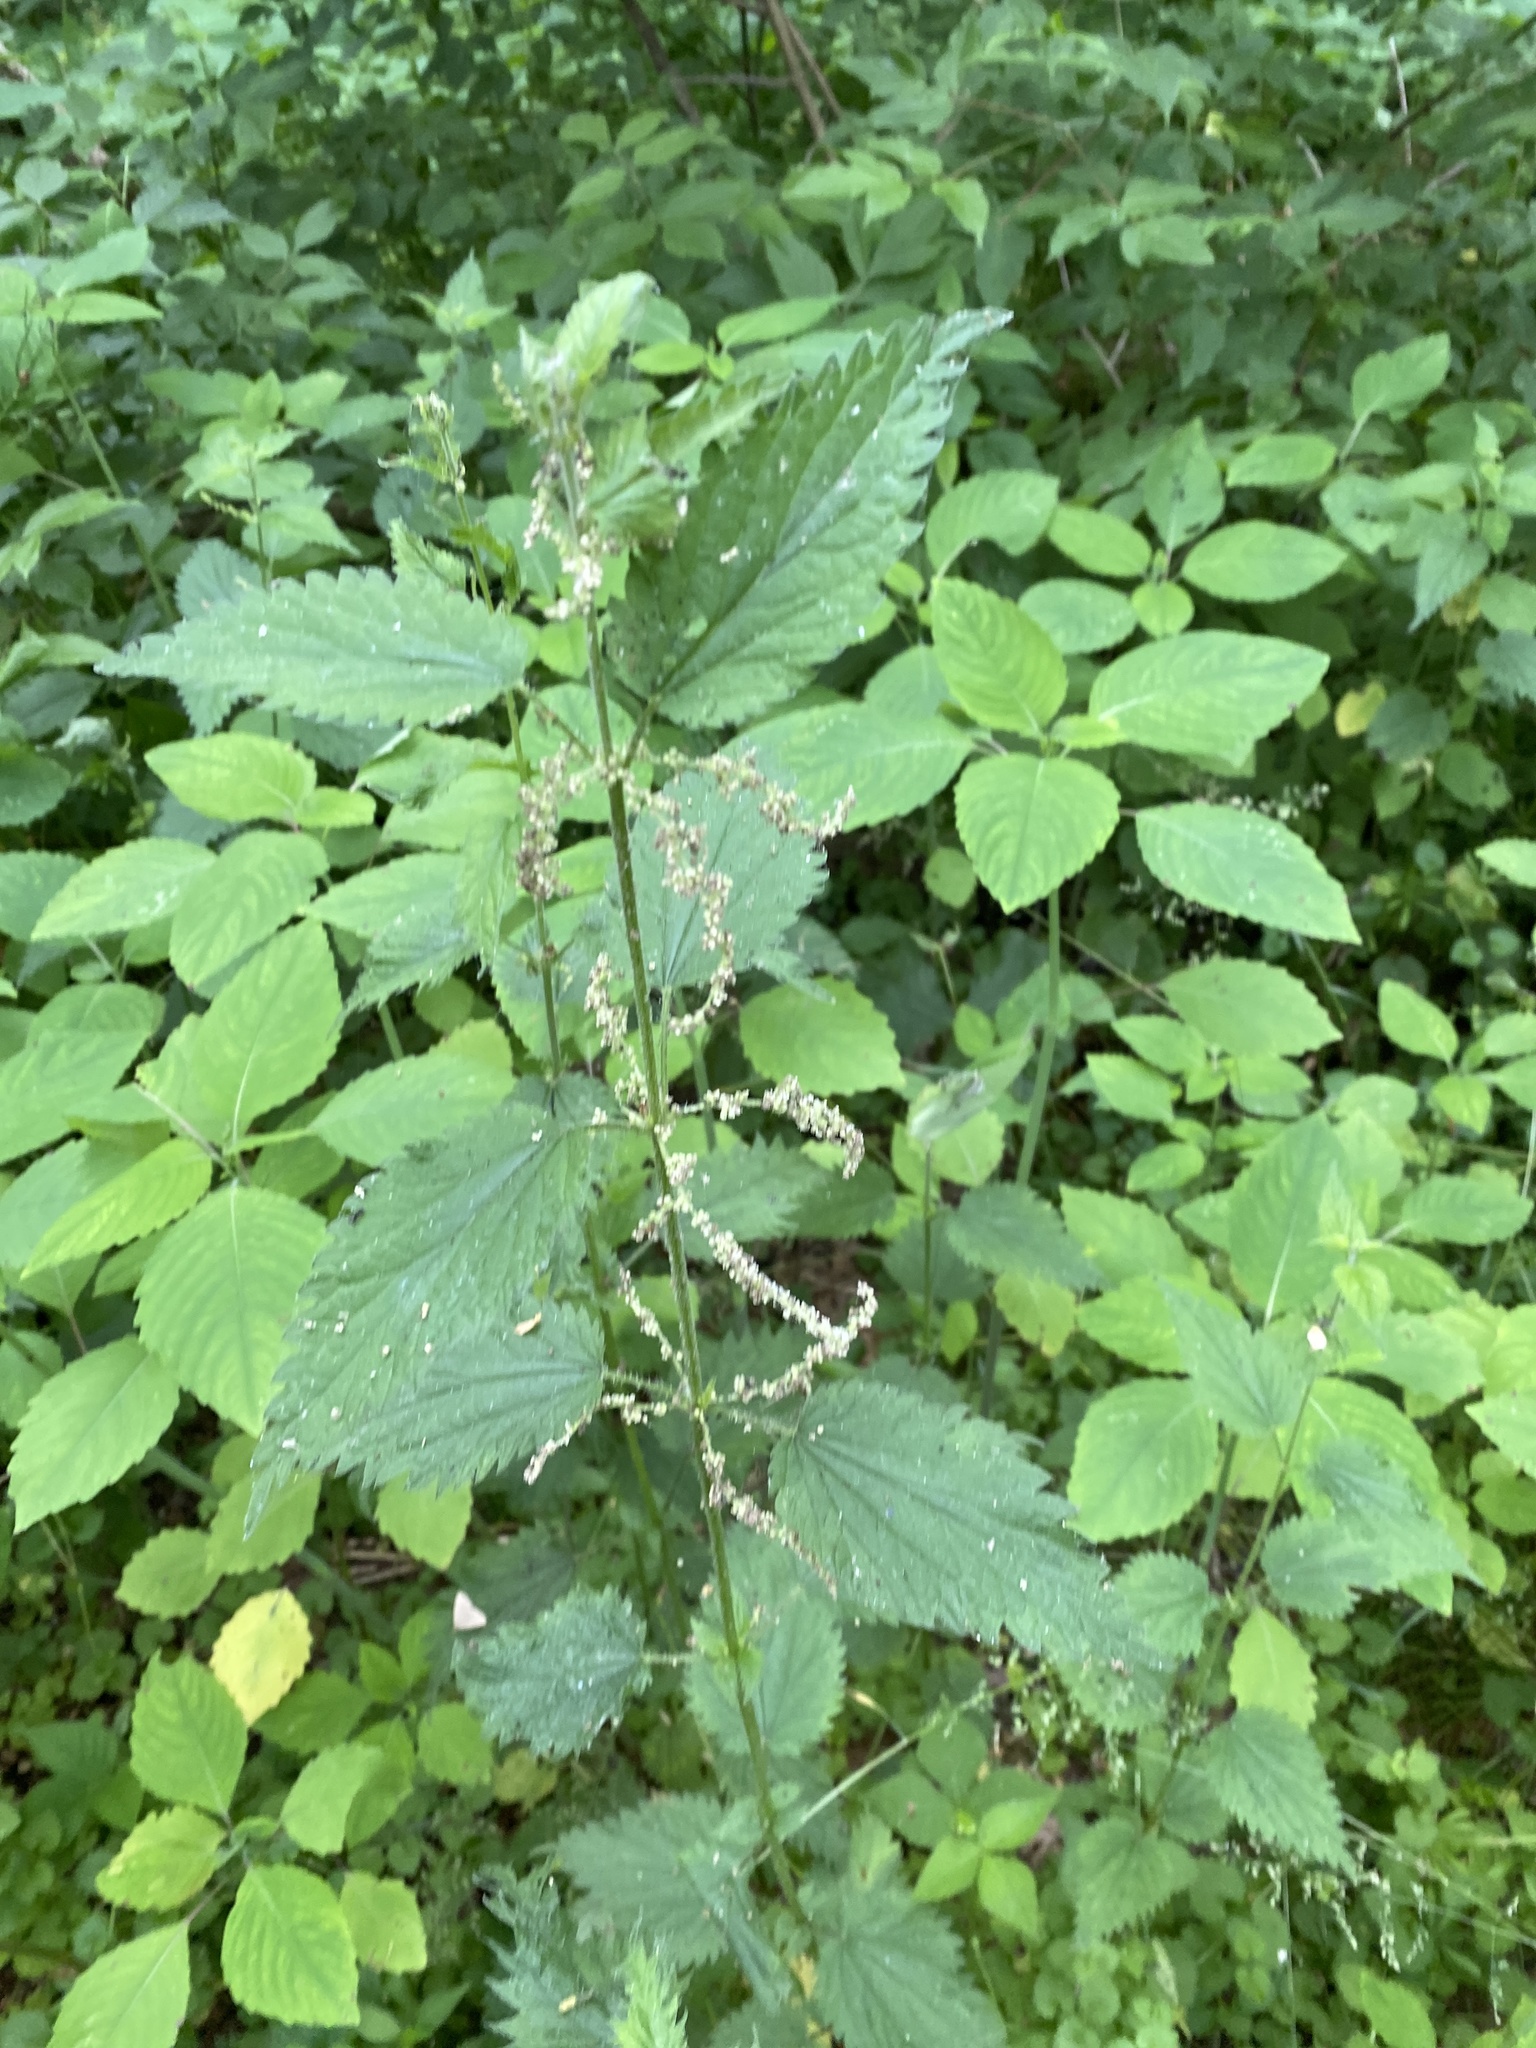 Maryland Biodiversity Project - Stinging Nettle (Urtica dioica)